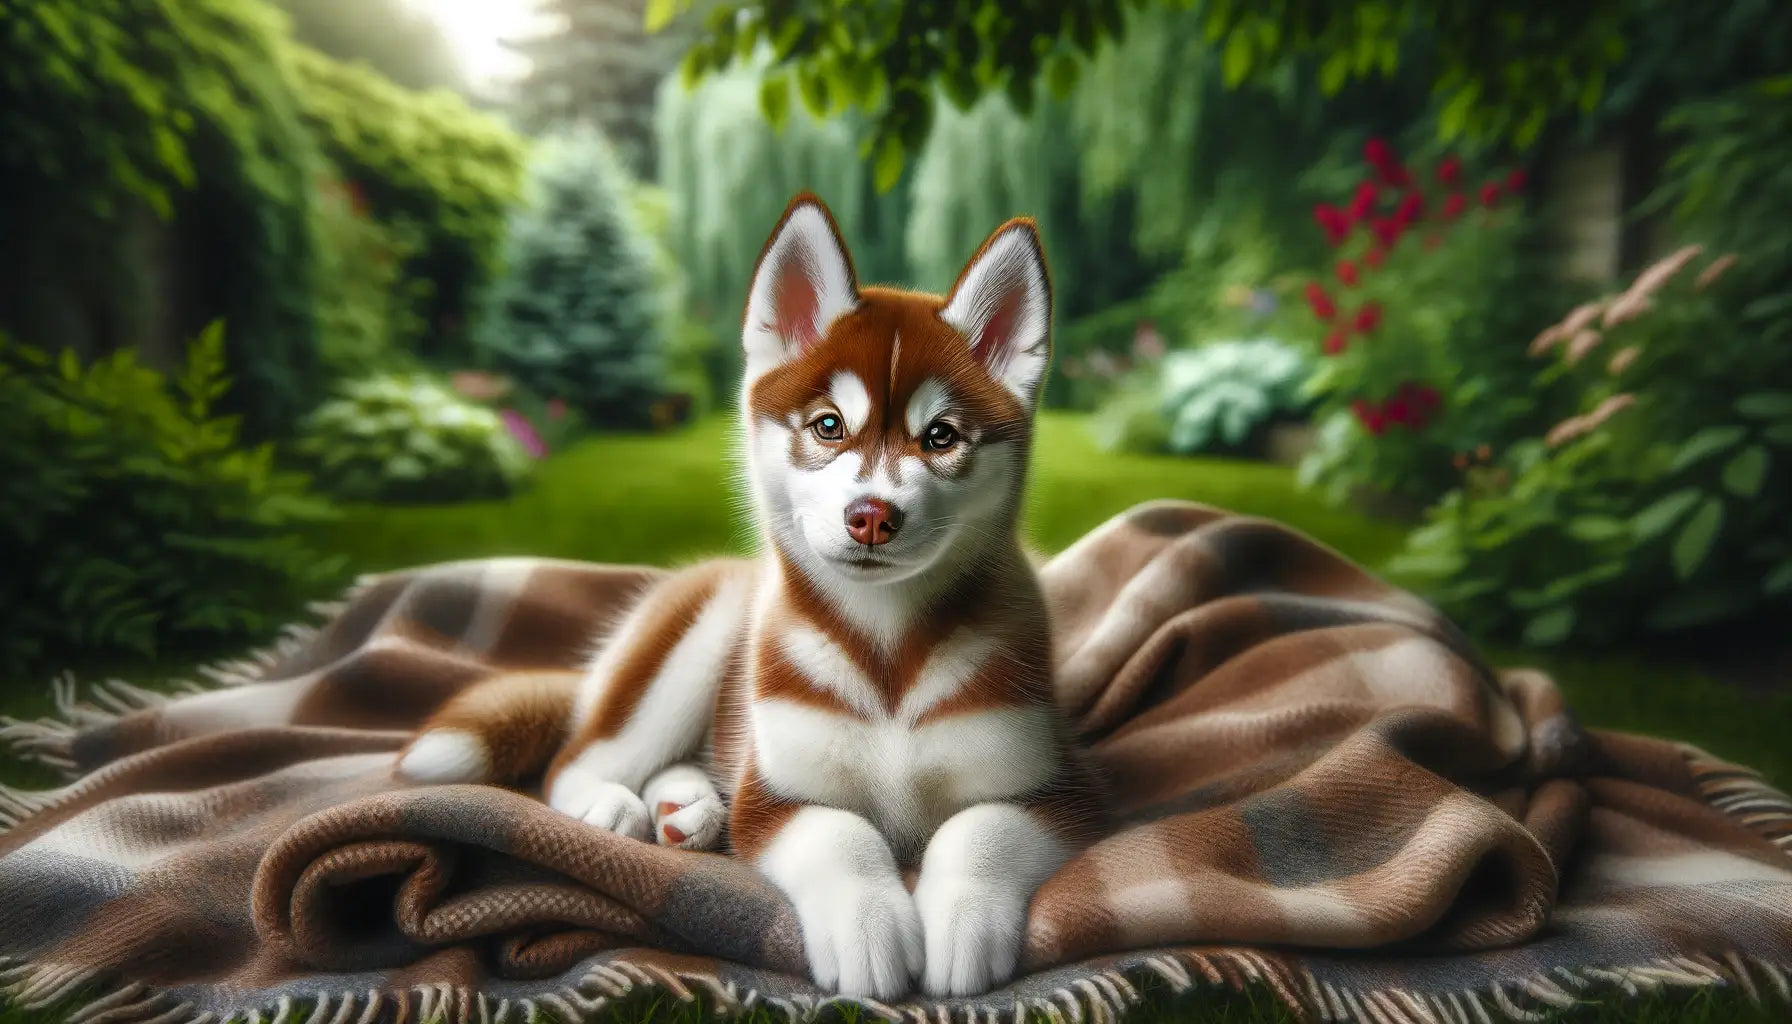 Image showing a Red Husky lying on a soft blanket outdoors, set against a lush background of greenery.